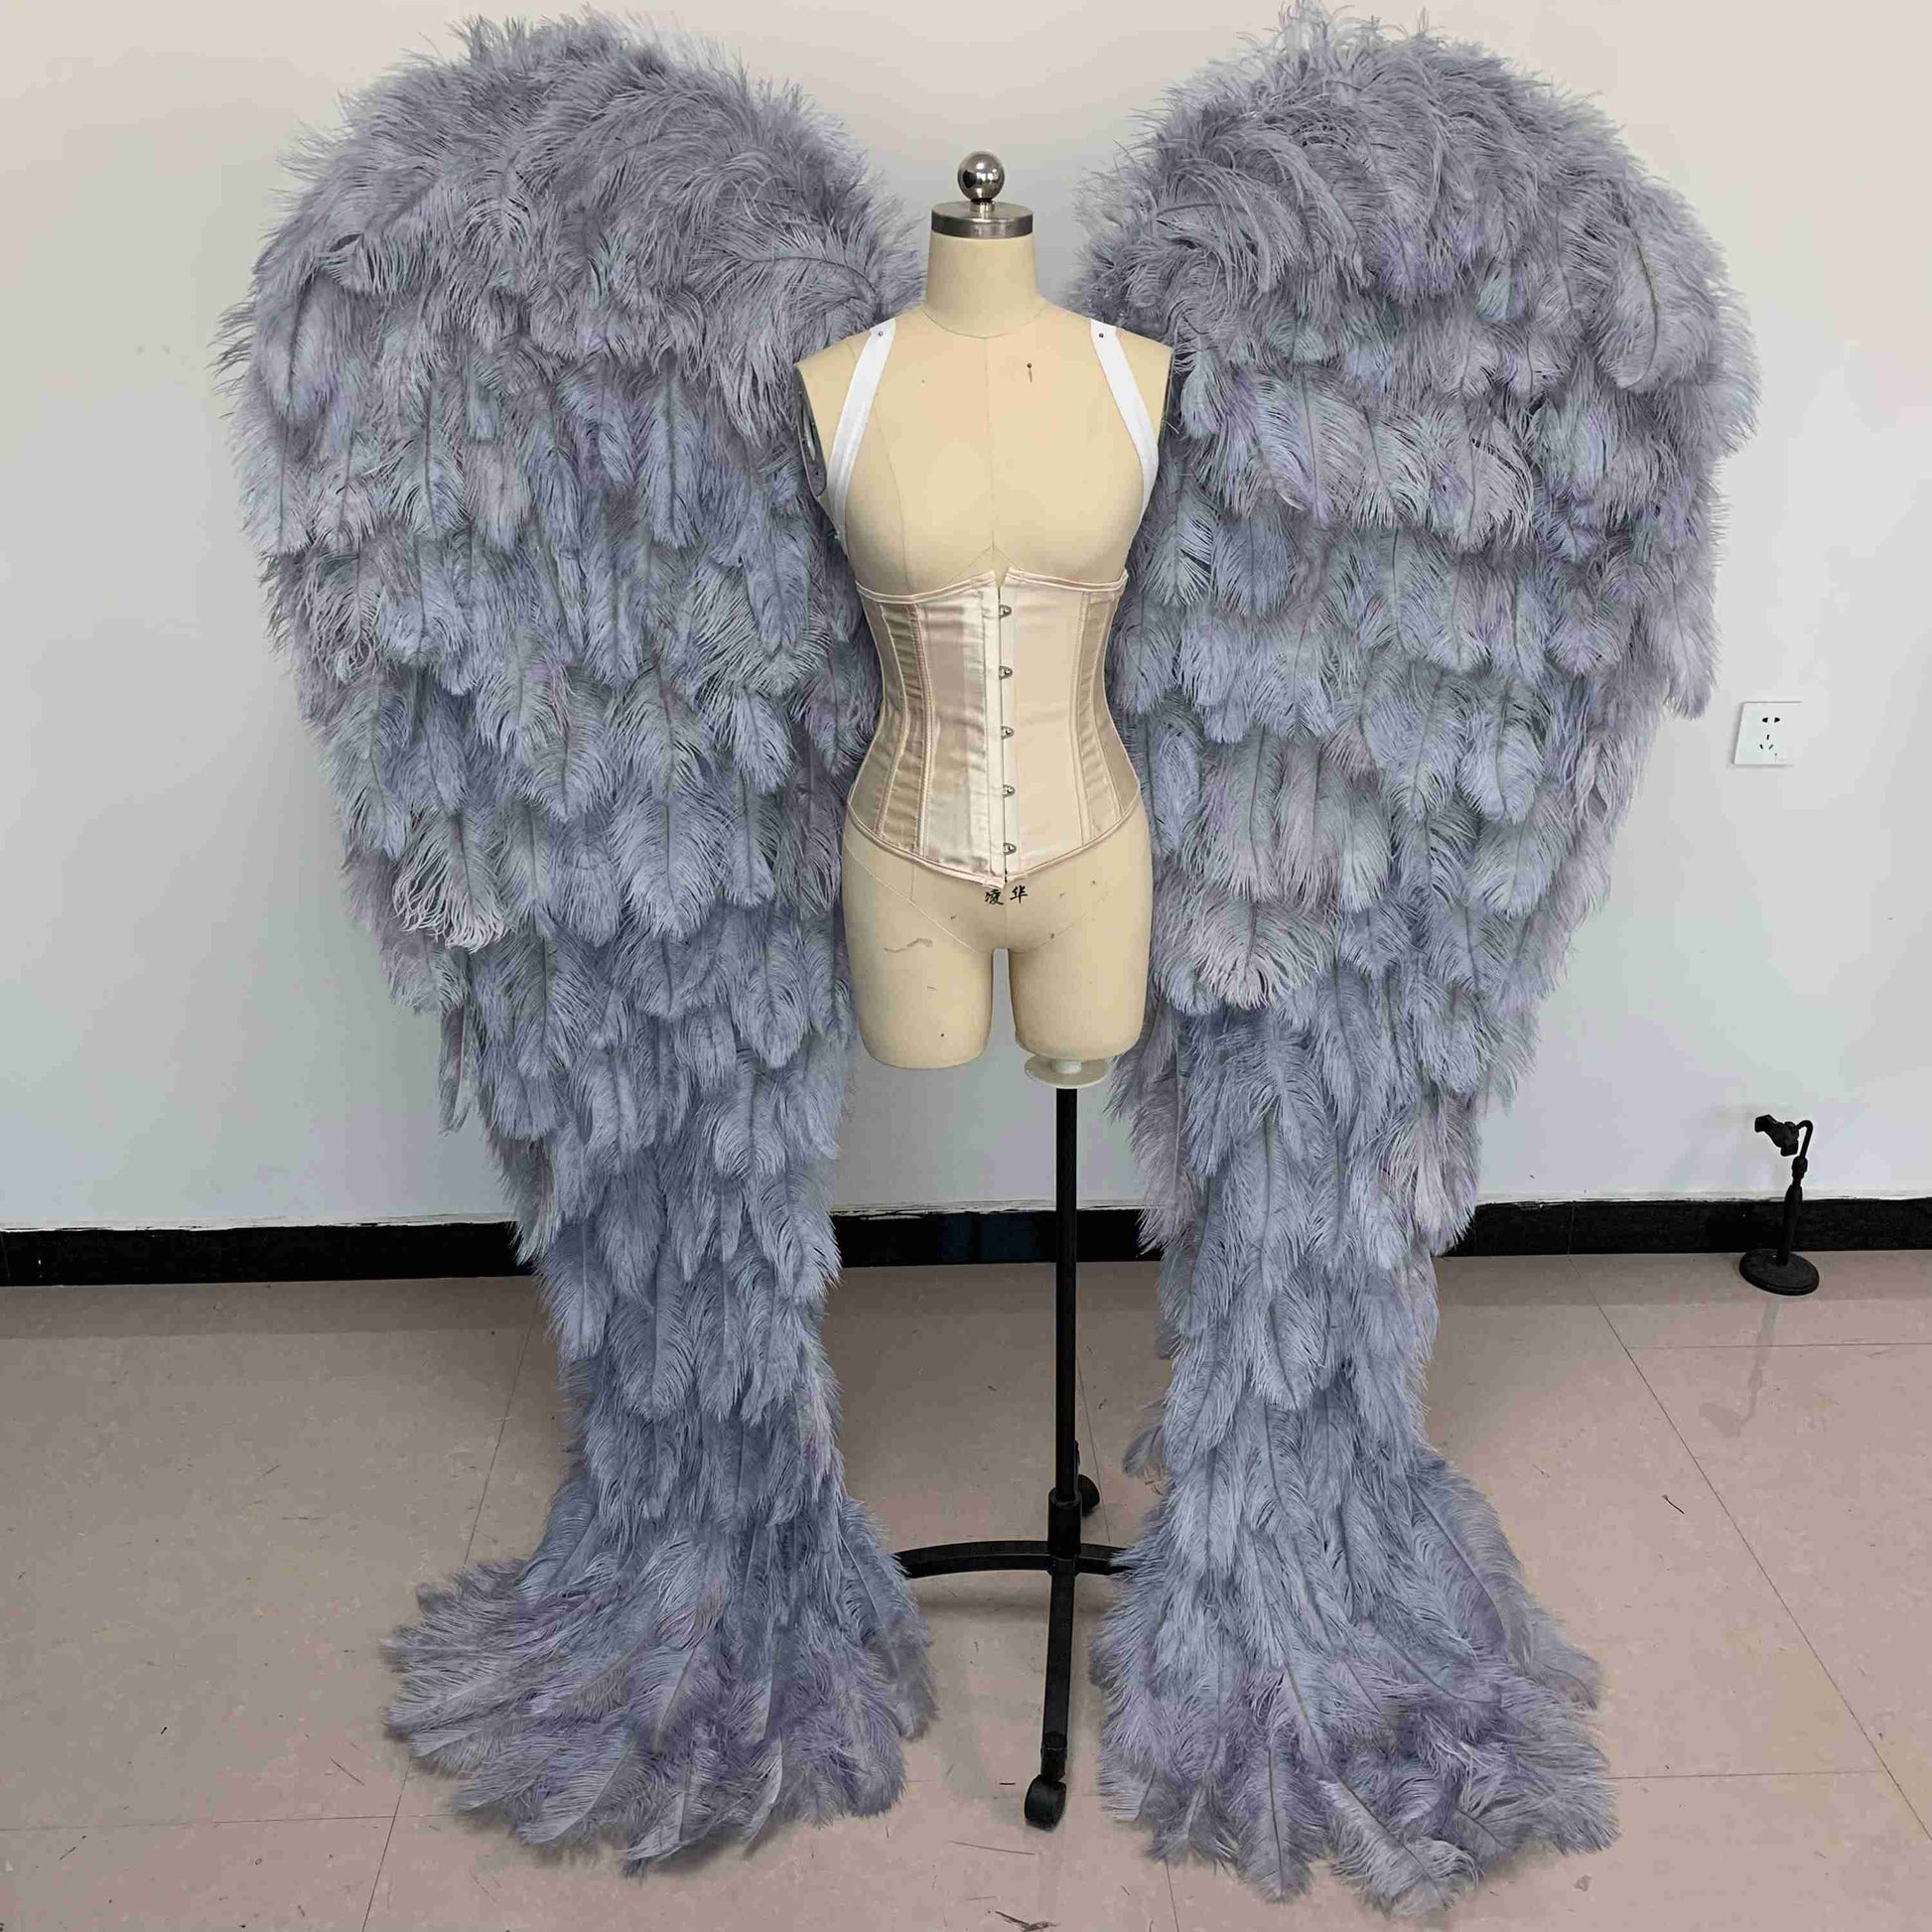 Our luxury gray angel wings from the front. Made from ostrich feathers. Wings for angel costume. Suitable for photoshoots especially for boudoirs.